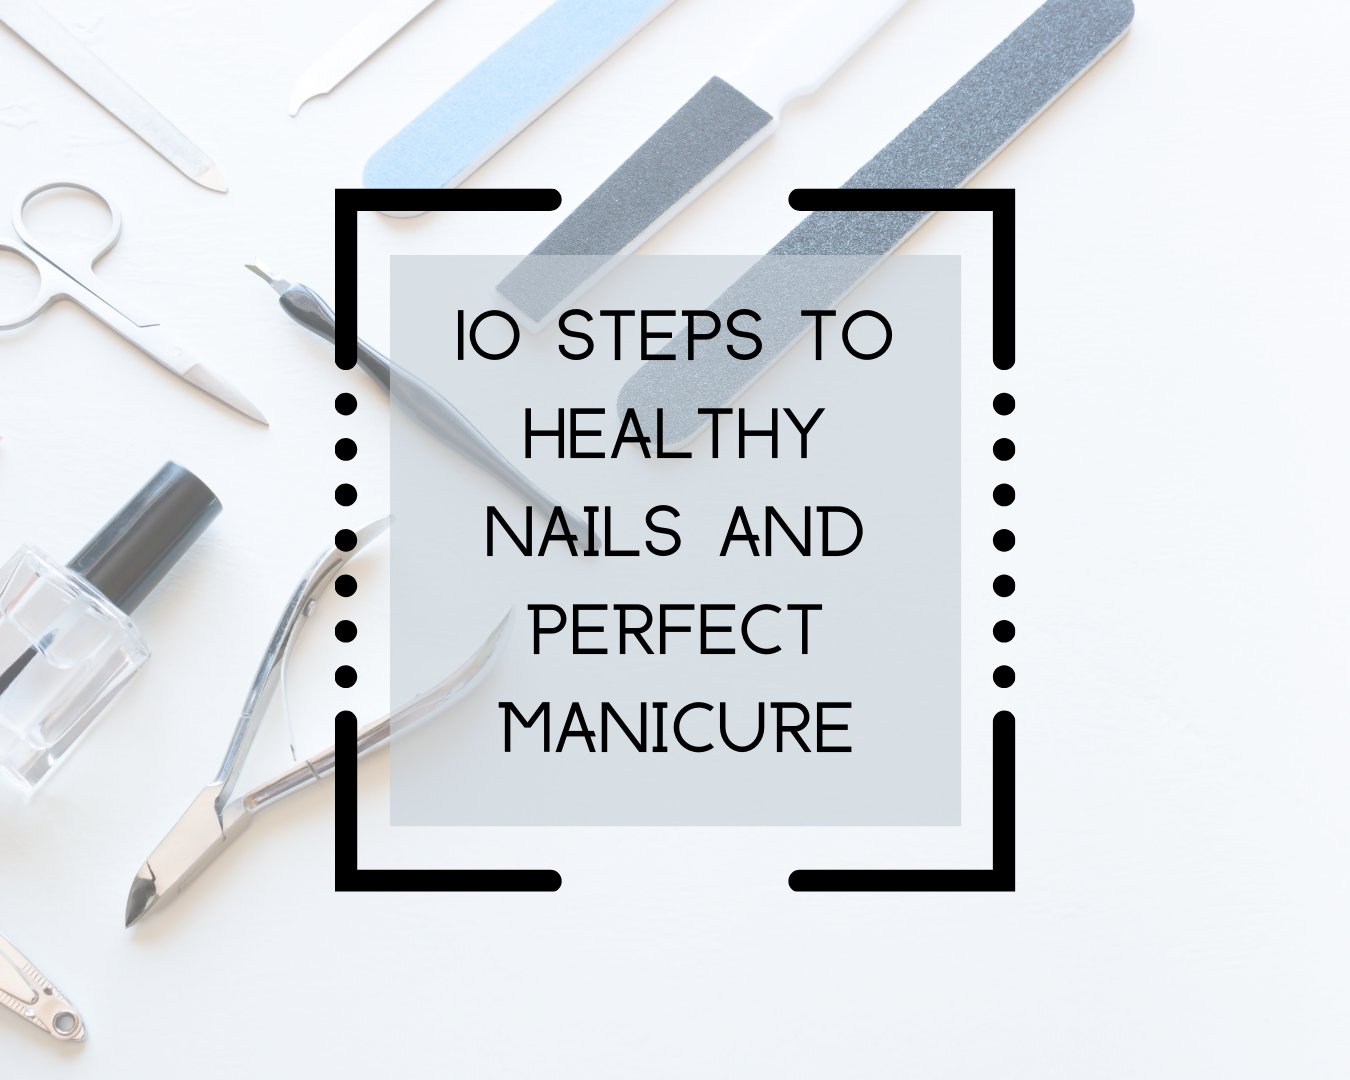 Steps to perfect manicure